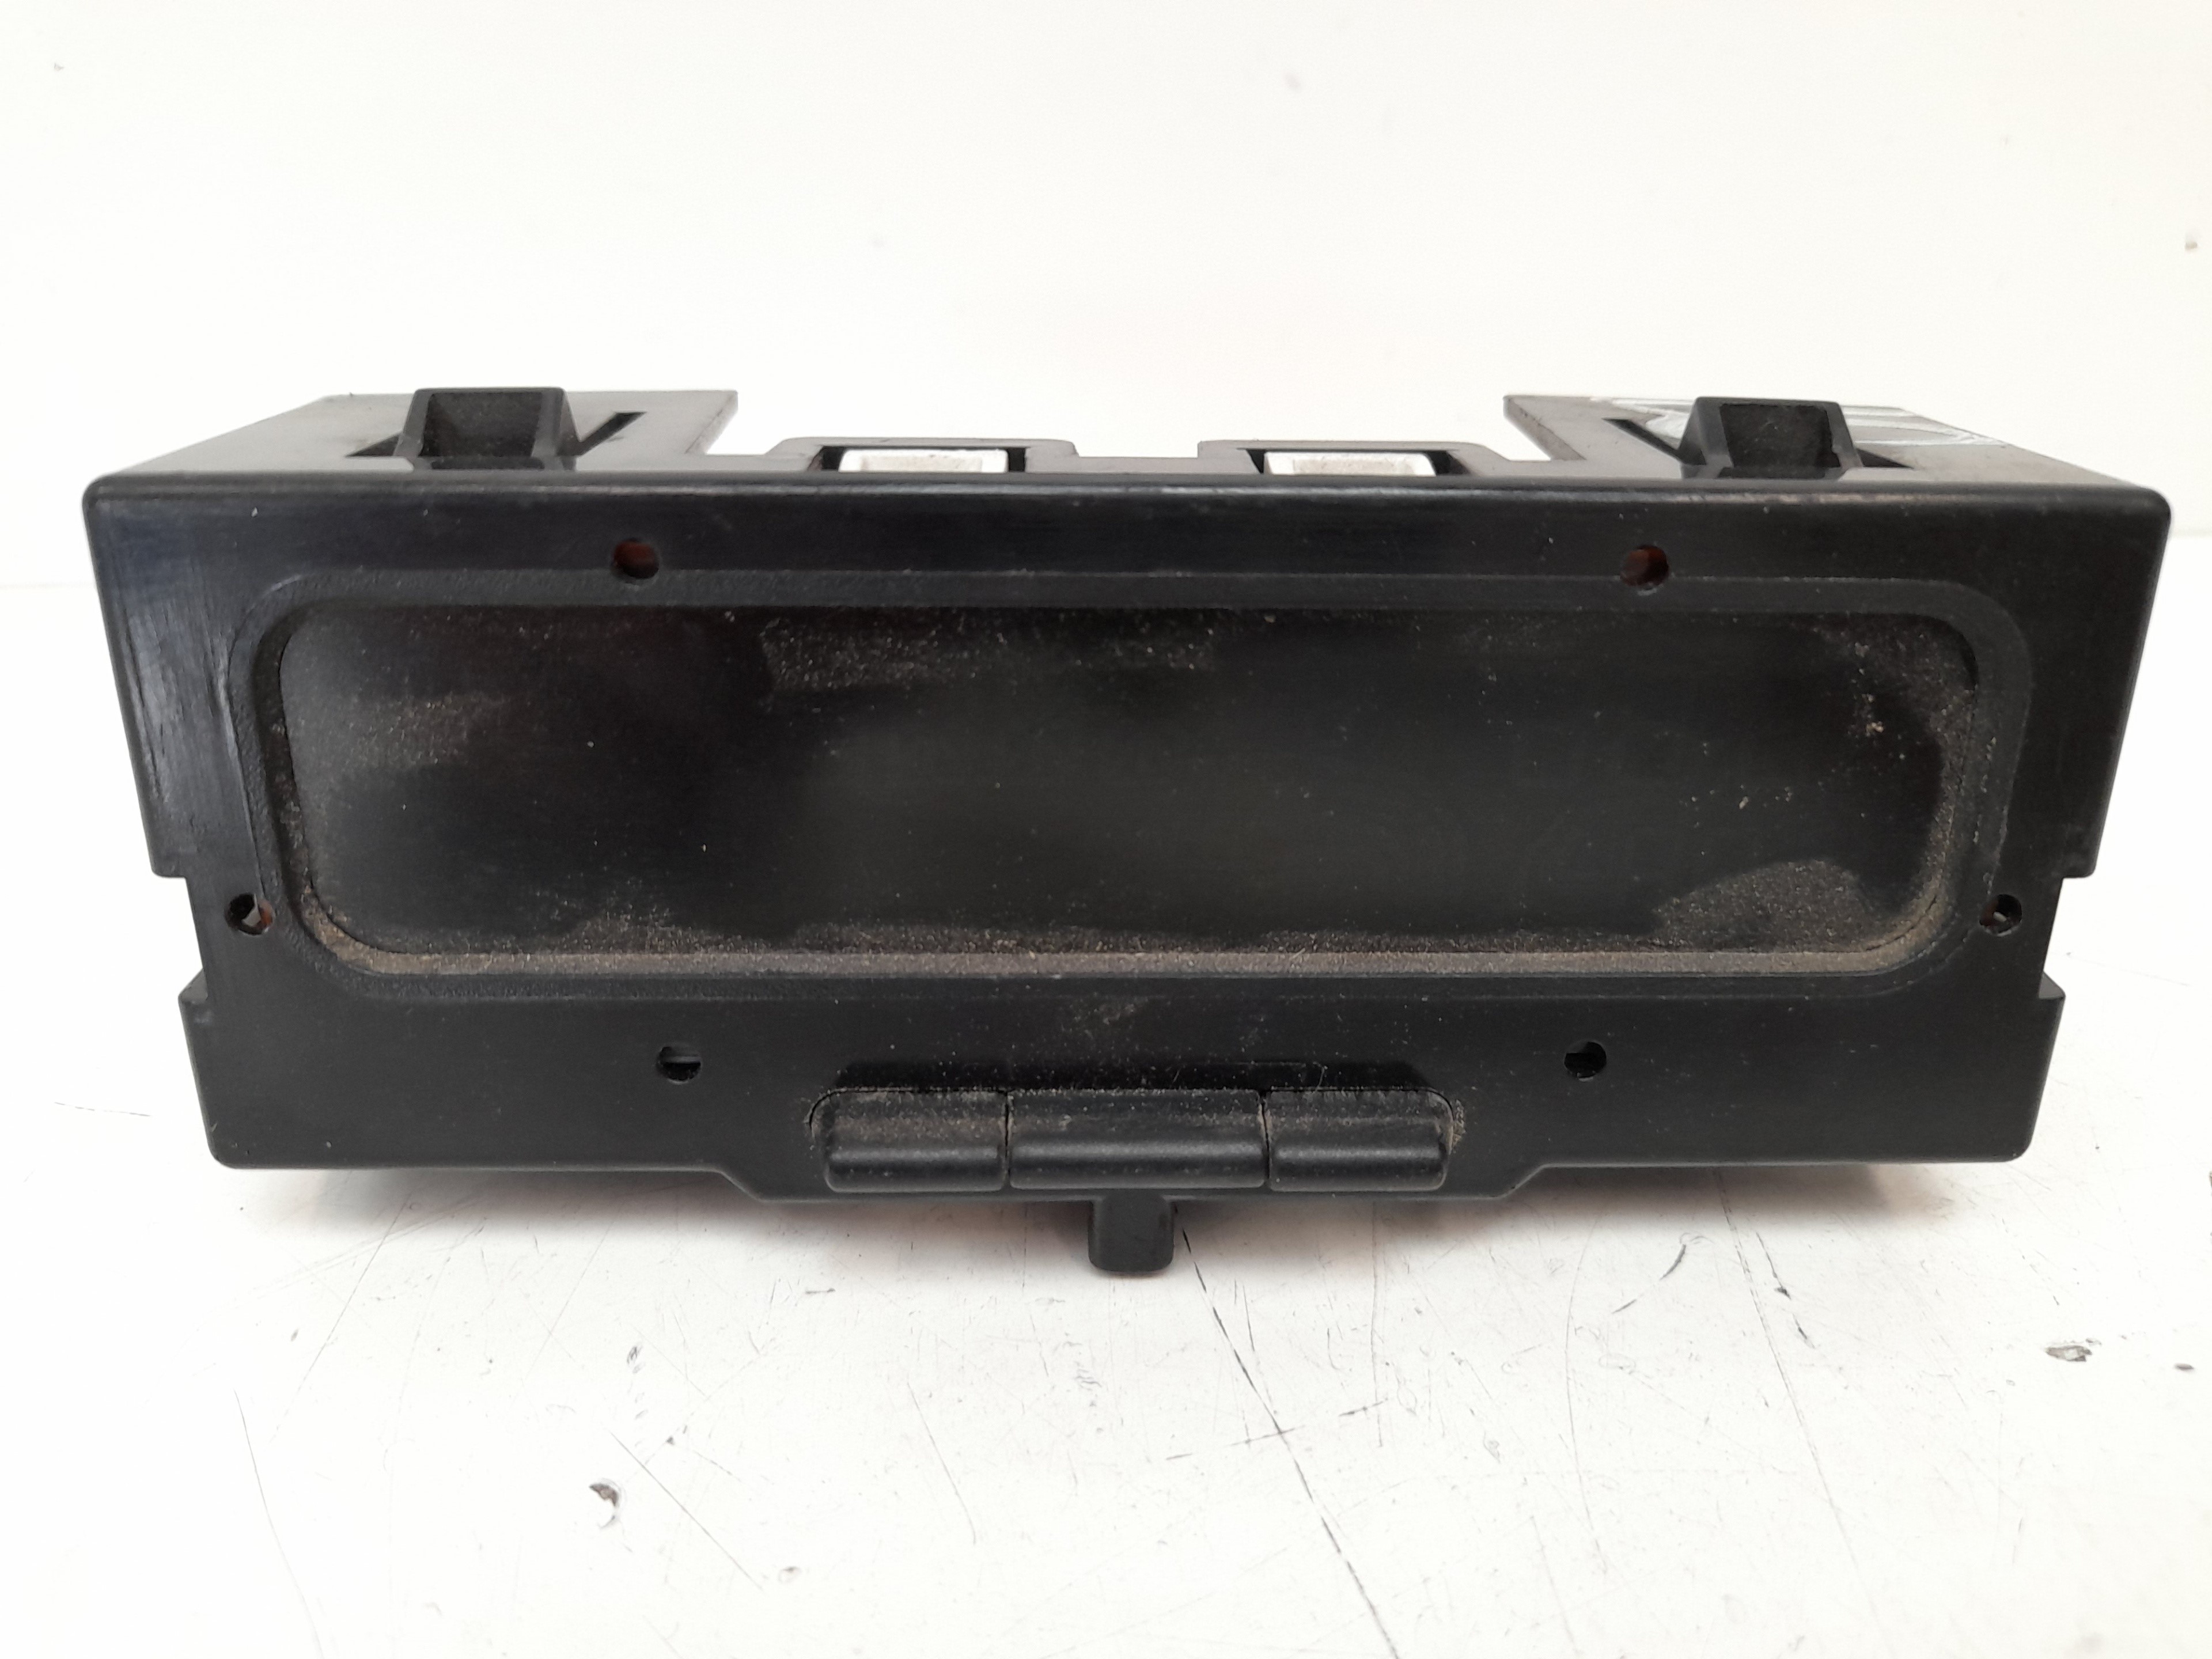 BMW Megane 2 generation (2002-2012) Other Interior Parts 7700436307A 22622101